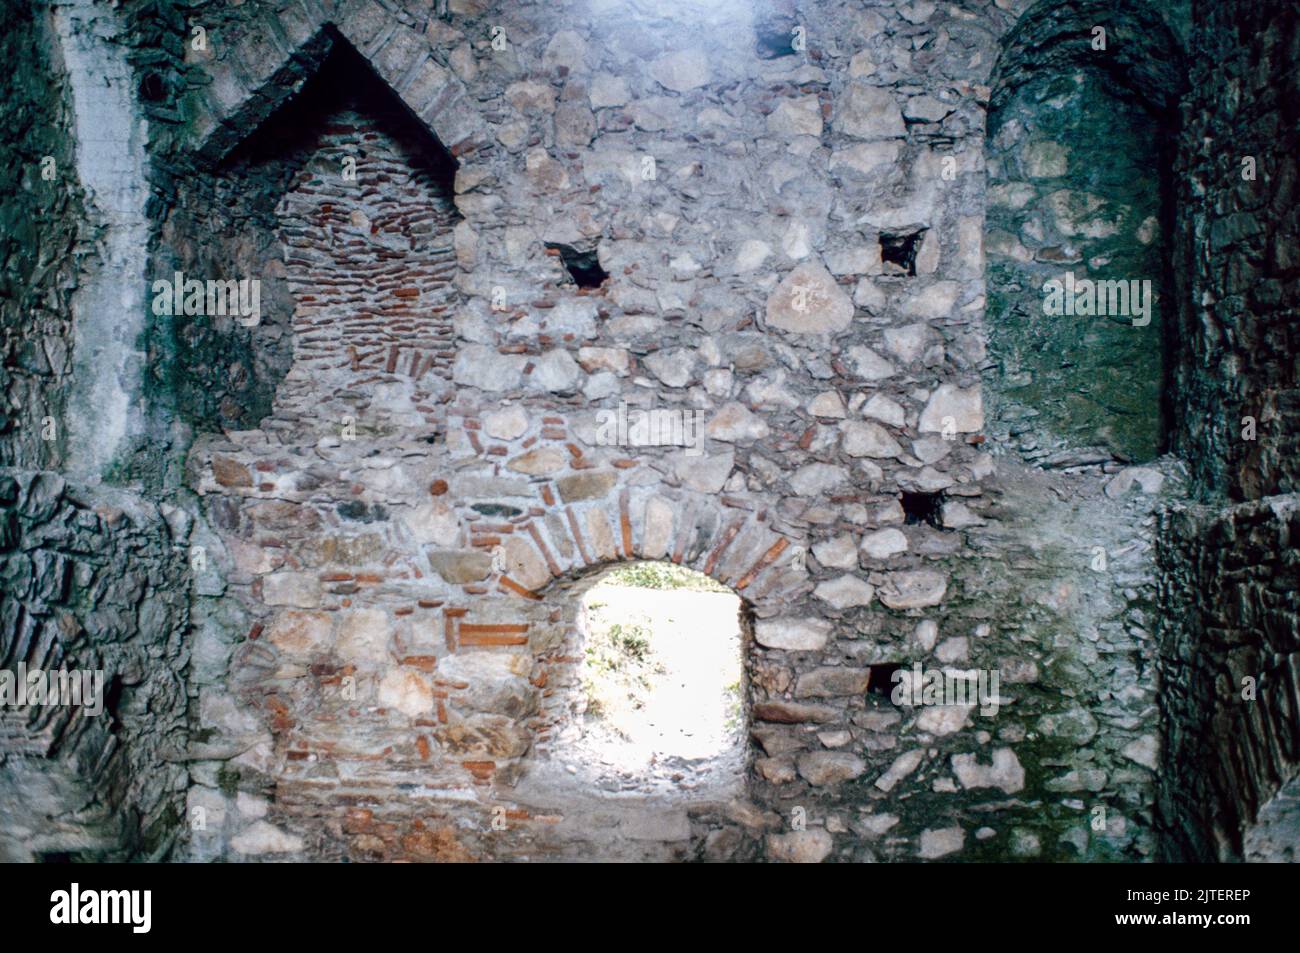 Fireplace in Despot’s Palace atMystras (Mistras or Myzithras), a fortified town and a former municipality in Laconia, Peloponnese, Greece near ancient Sparta, it served as the capital of the Byzantine Despotate of the Morea. March 1980. Archival scan from a slide. Stock Photo